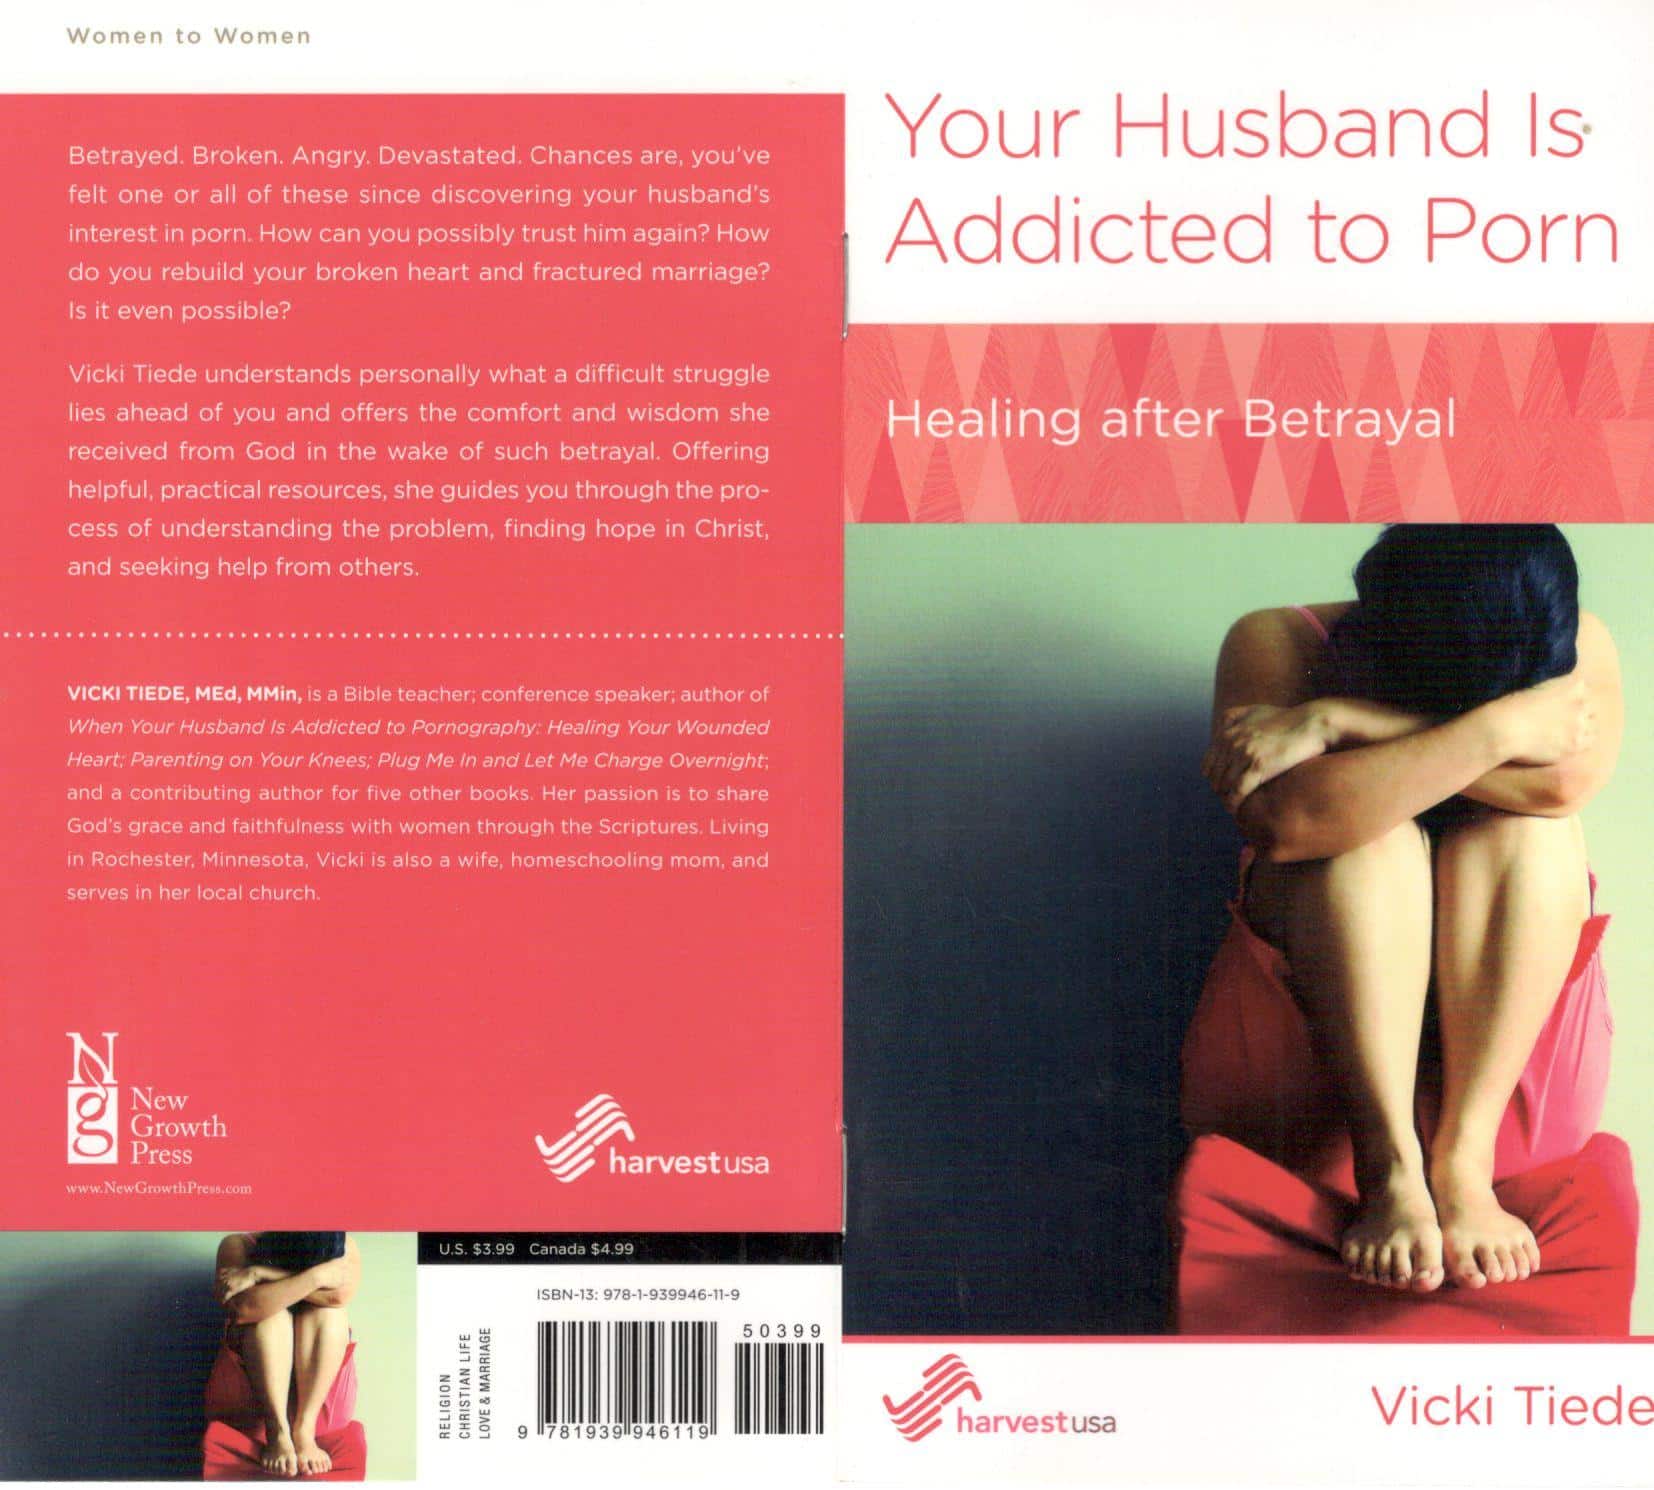 Your Husband is Addicted to Porn